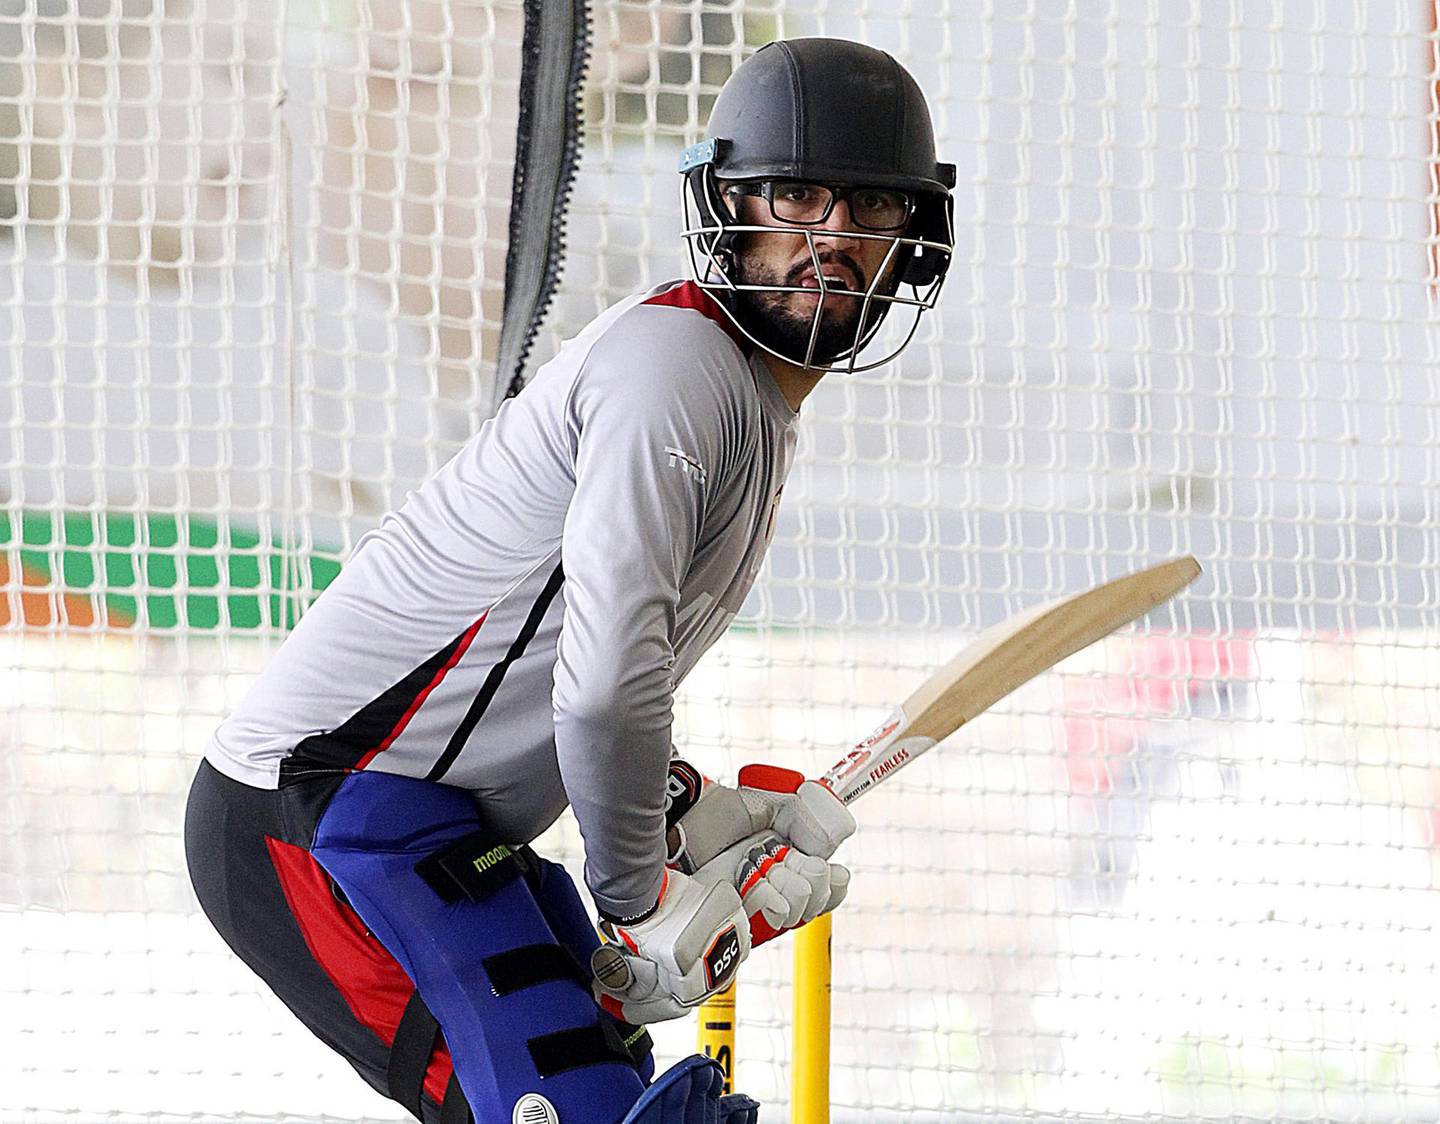 Dubai, August, 06, 2018:  UAE National team player Rohan Mustafa  trains ahead of the Asia Cup Qualifier later this month  at the ICC Academy in Dubai. Satish Kumar for the National/ Story by Paul Radley